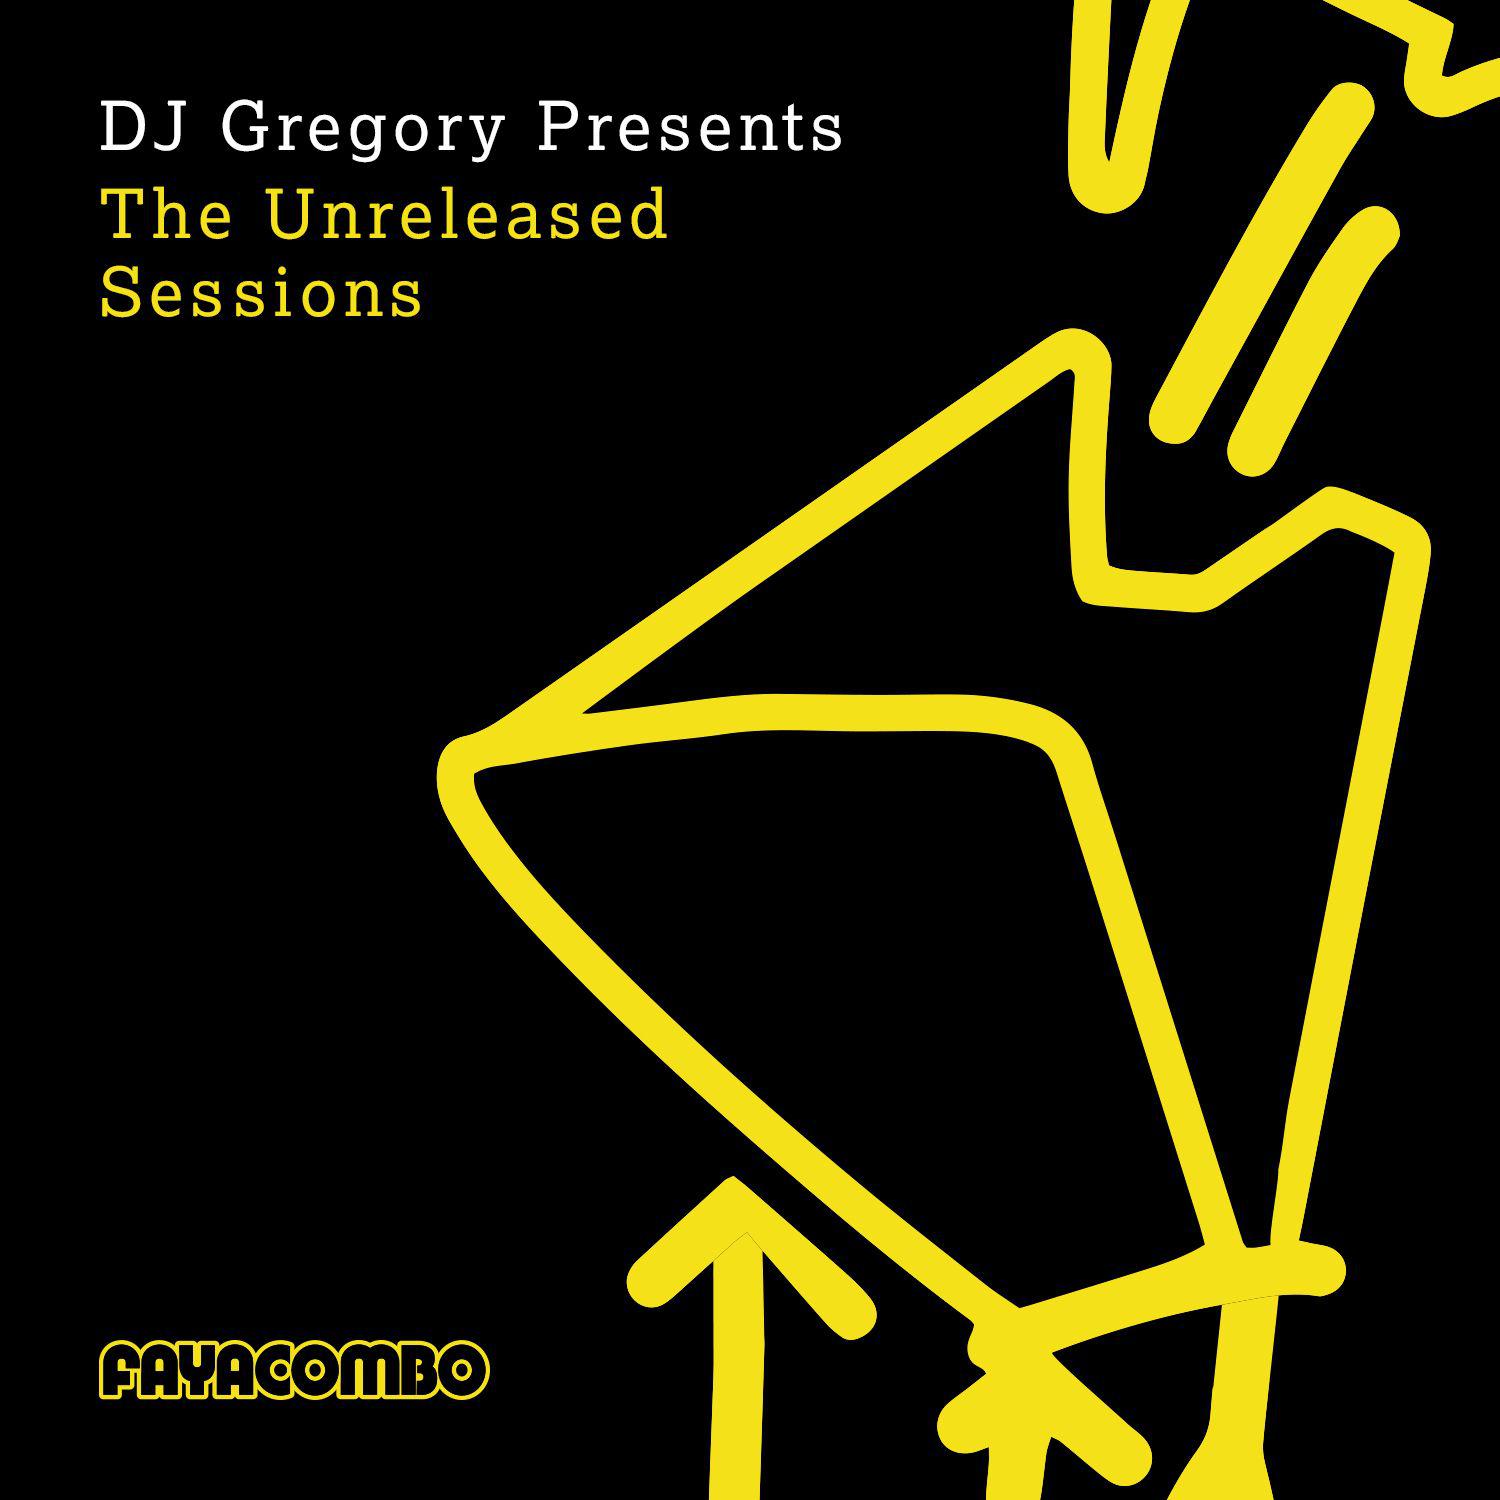 DJ Gregory presents The Unreleased Sessions专辑